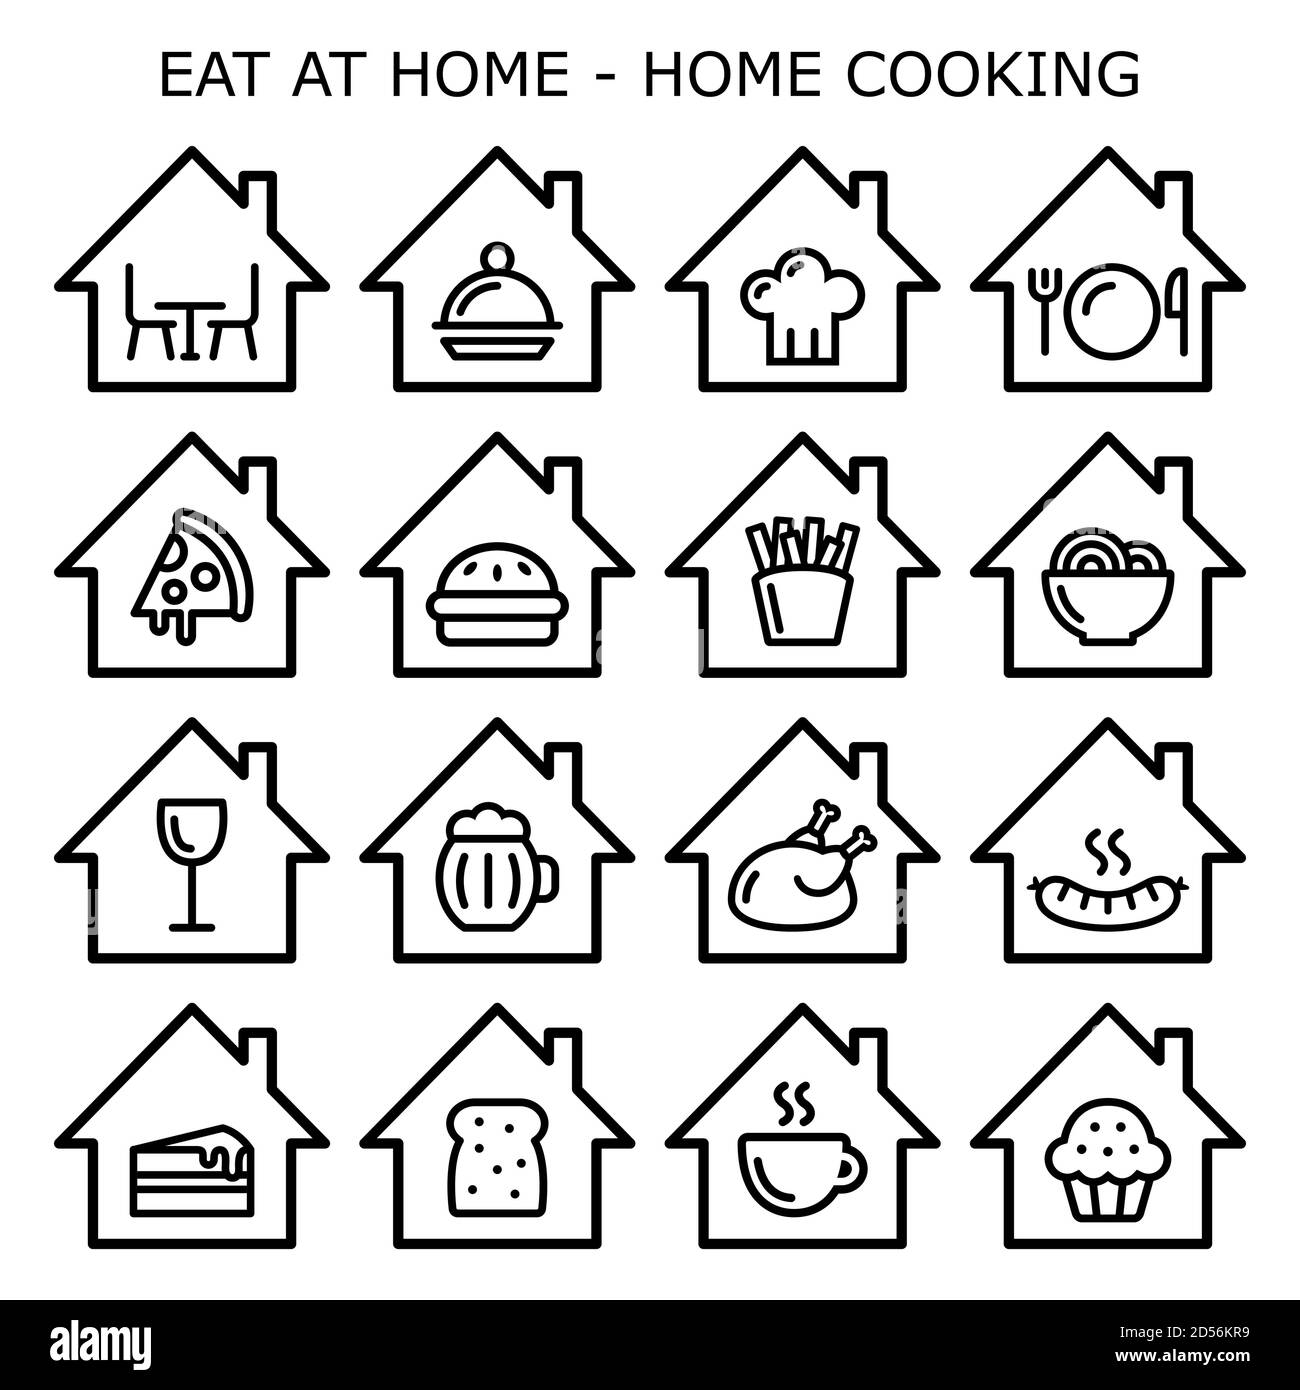 Eating at home, home cooking vector icons set, staying in concept,  cooking dinner or baking a cake or bread at home Stock Vector